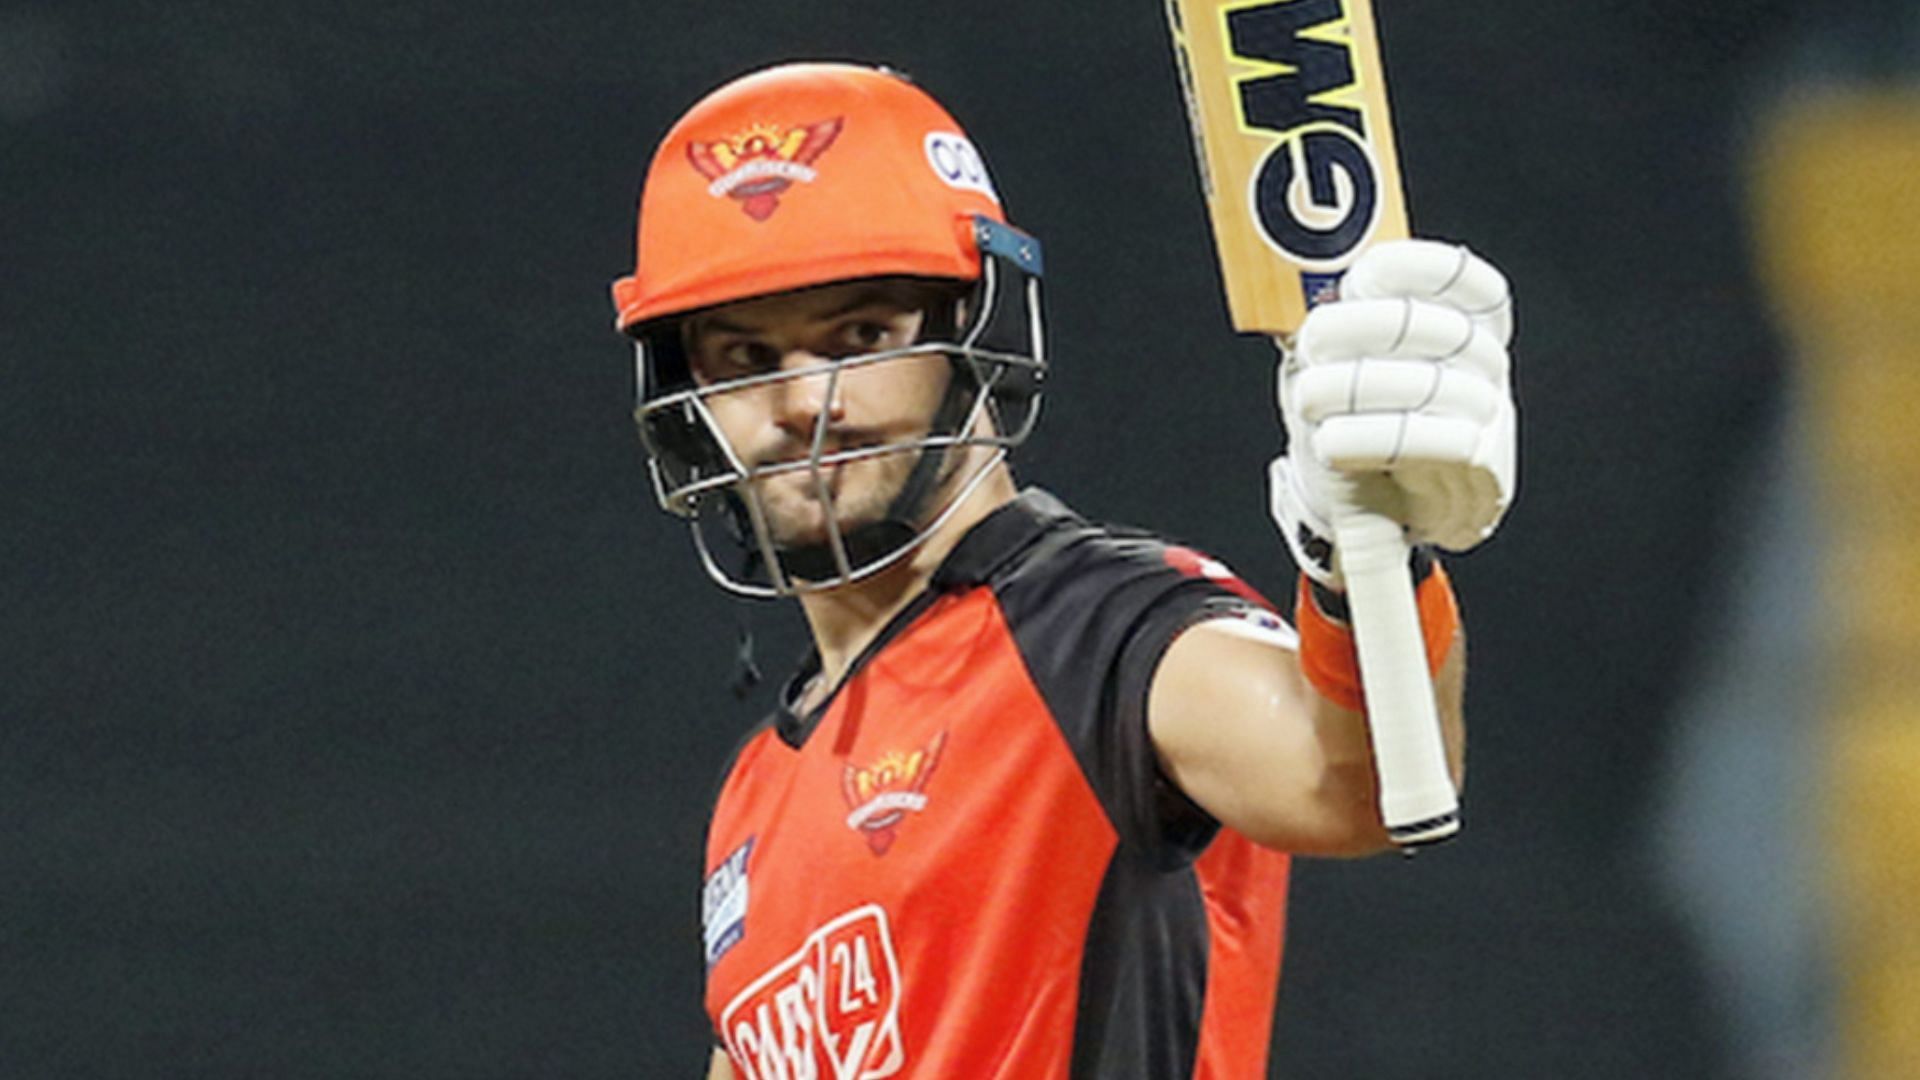 Markram was handed over the captaincy reigns of SRH ahead of the 2023 IPL.